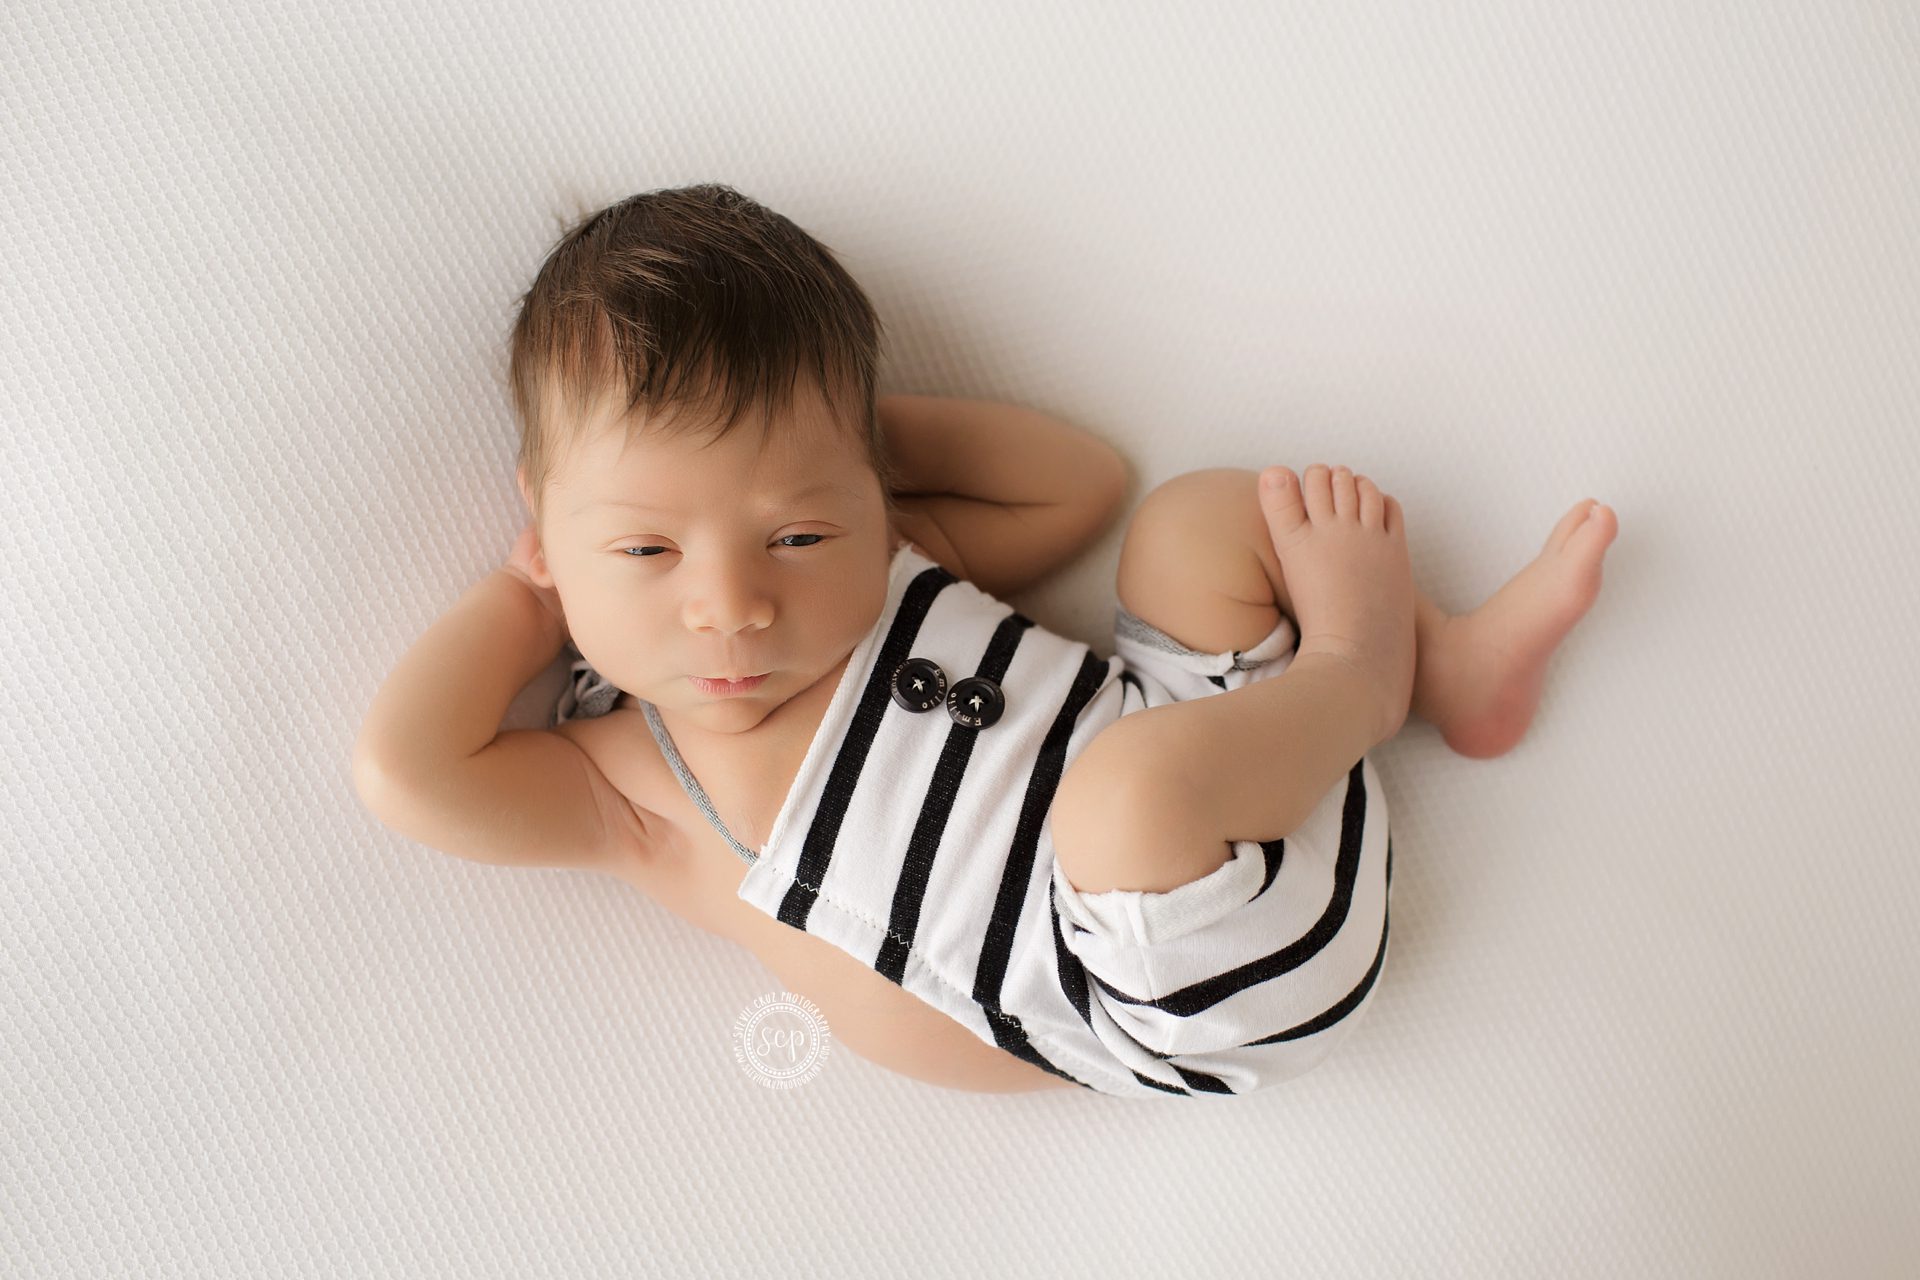 local newborn photographer in Orange county captures the most adorable baby boy